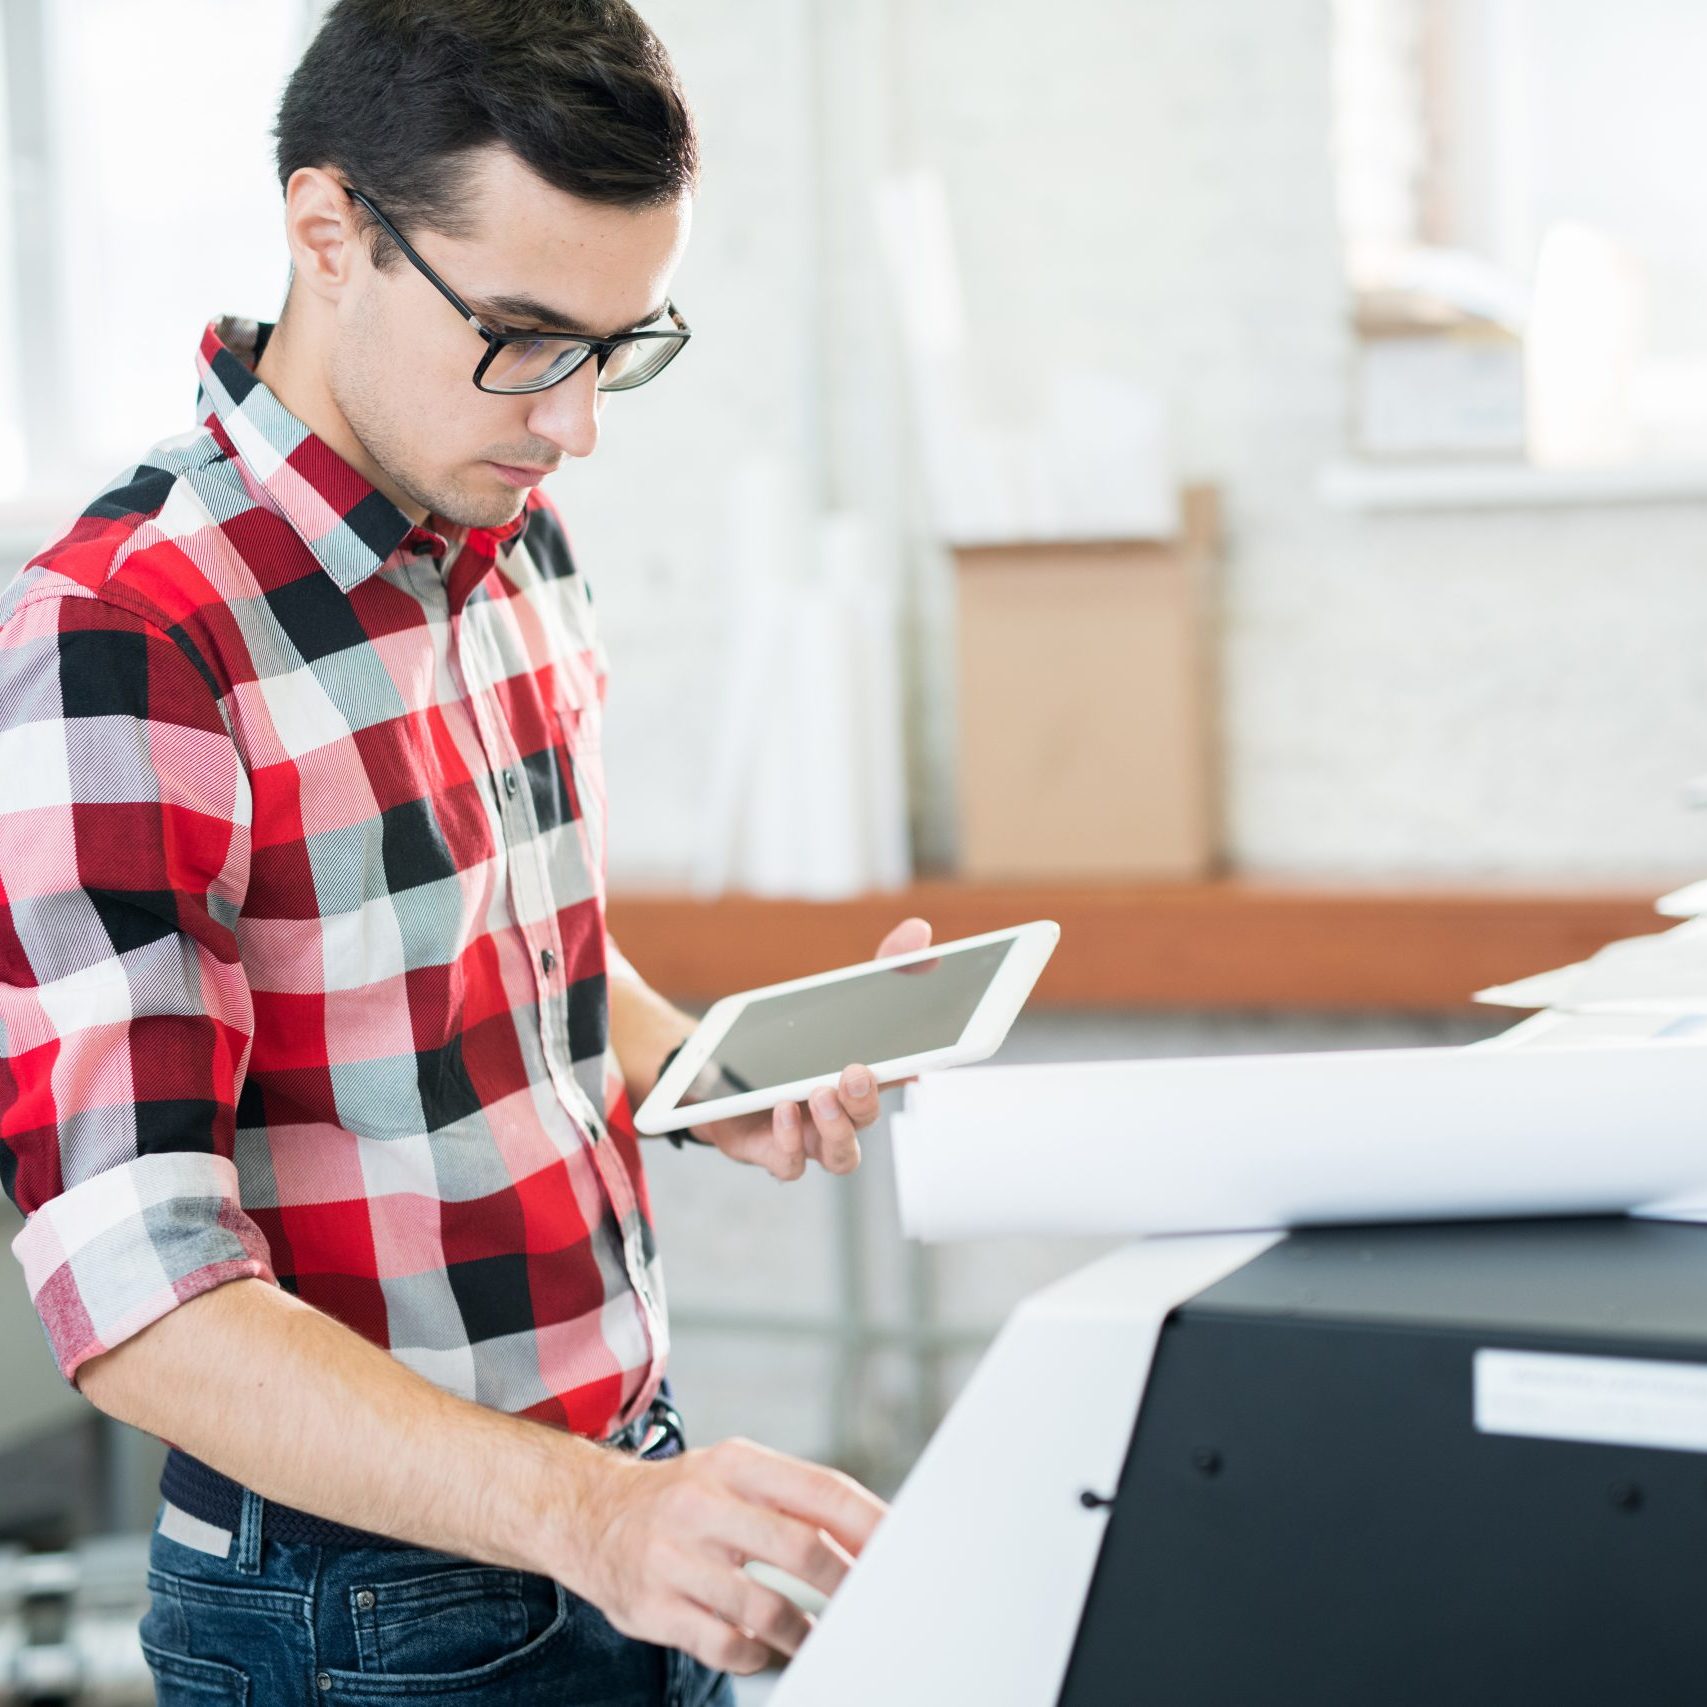 Choosing The Best Copier Dealer For Your Company